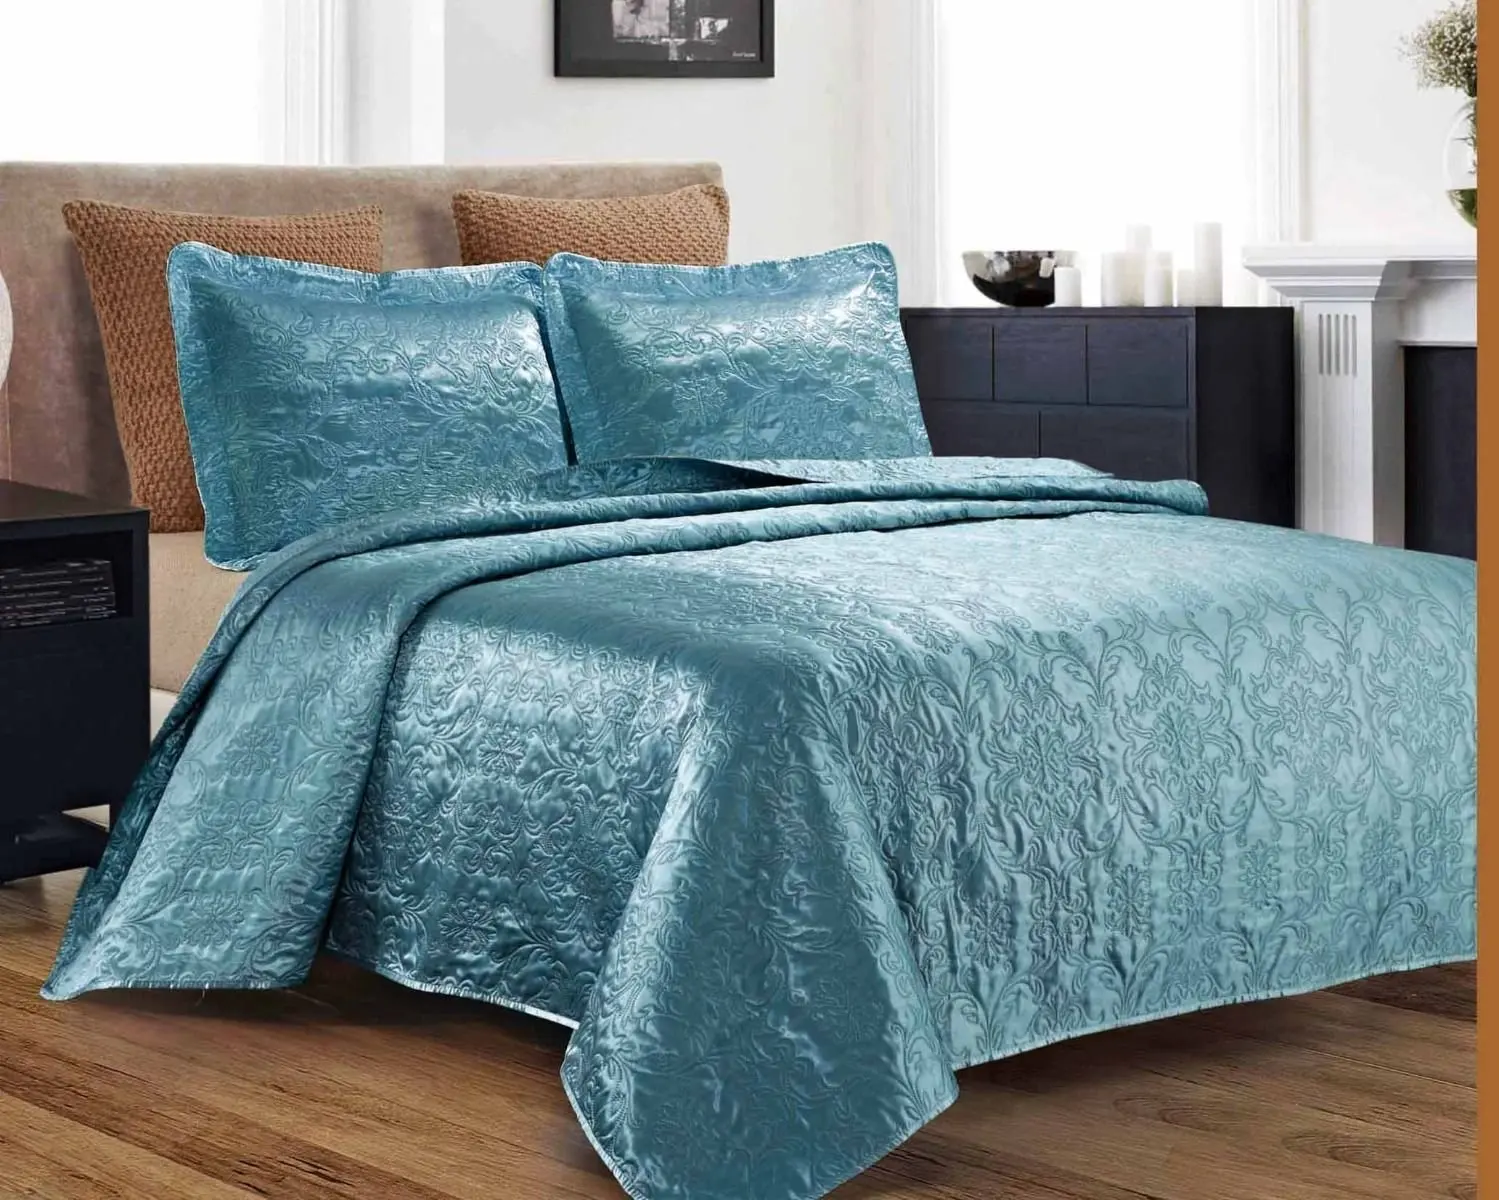 Buy 3 Piece Silky Satin Quilted Bedspread Coverlet Set Turquoise